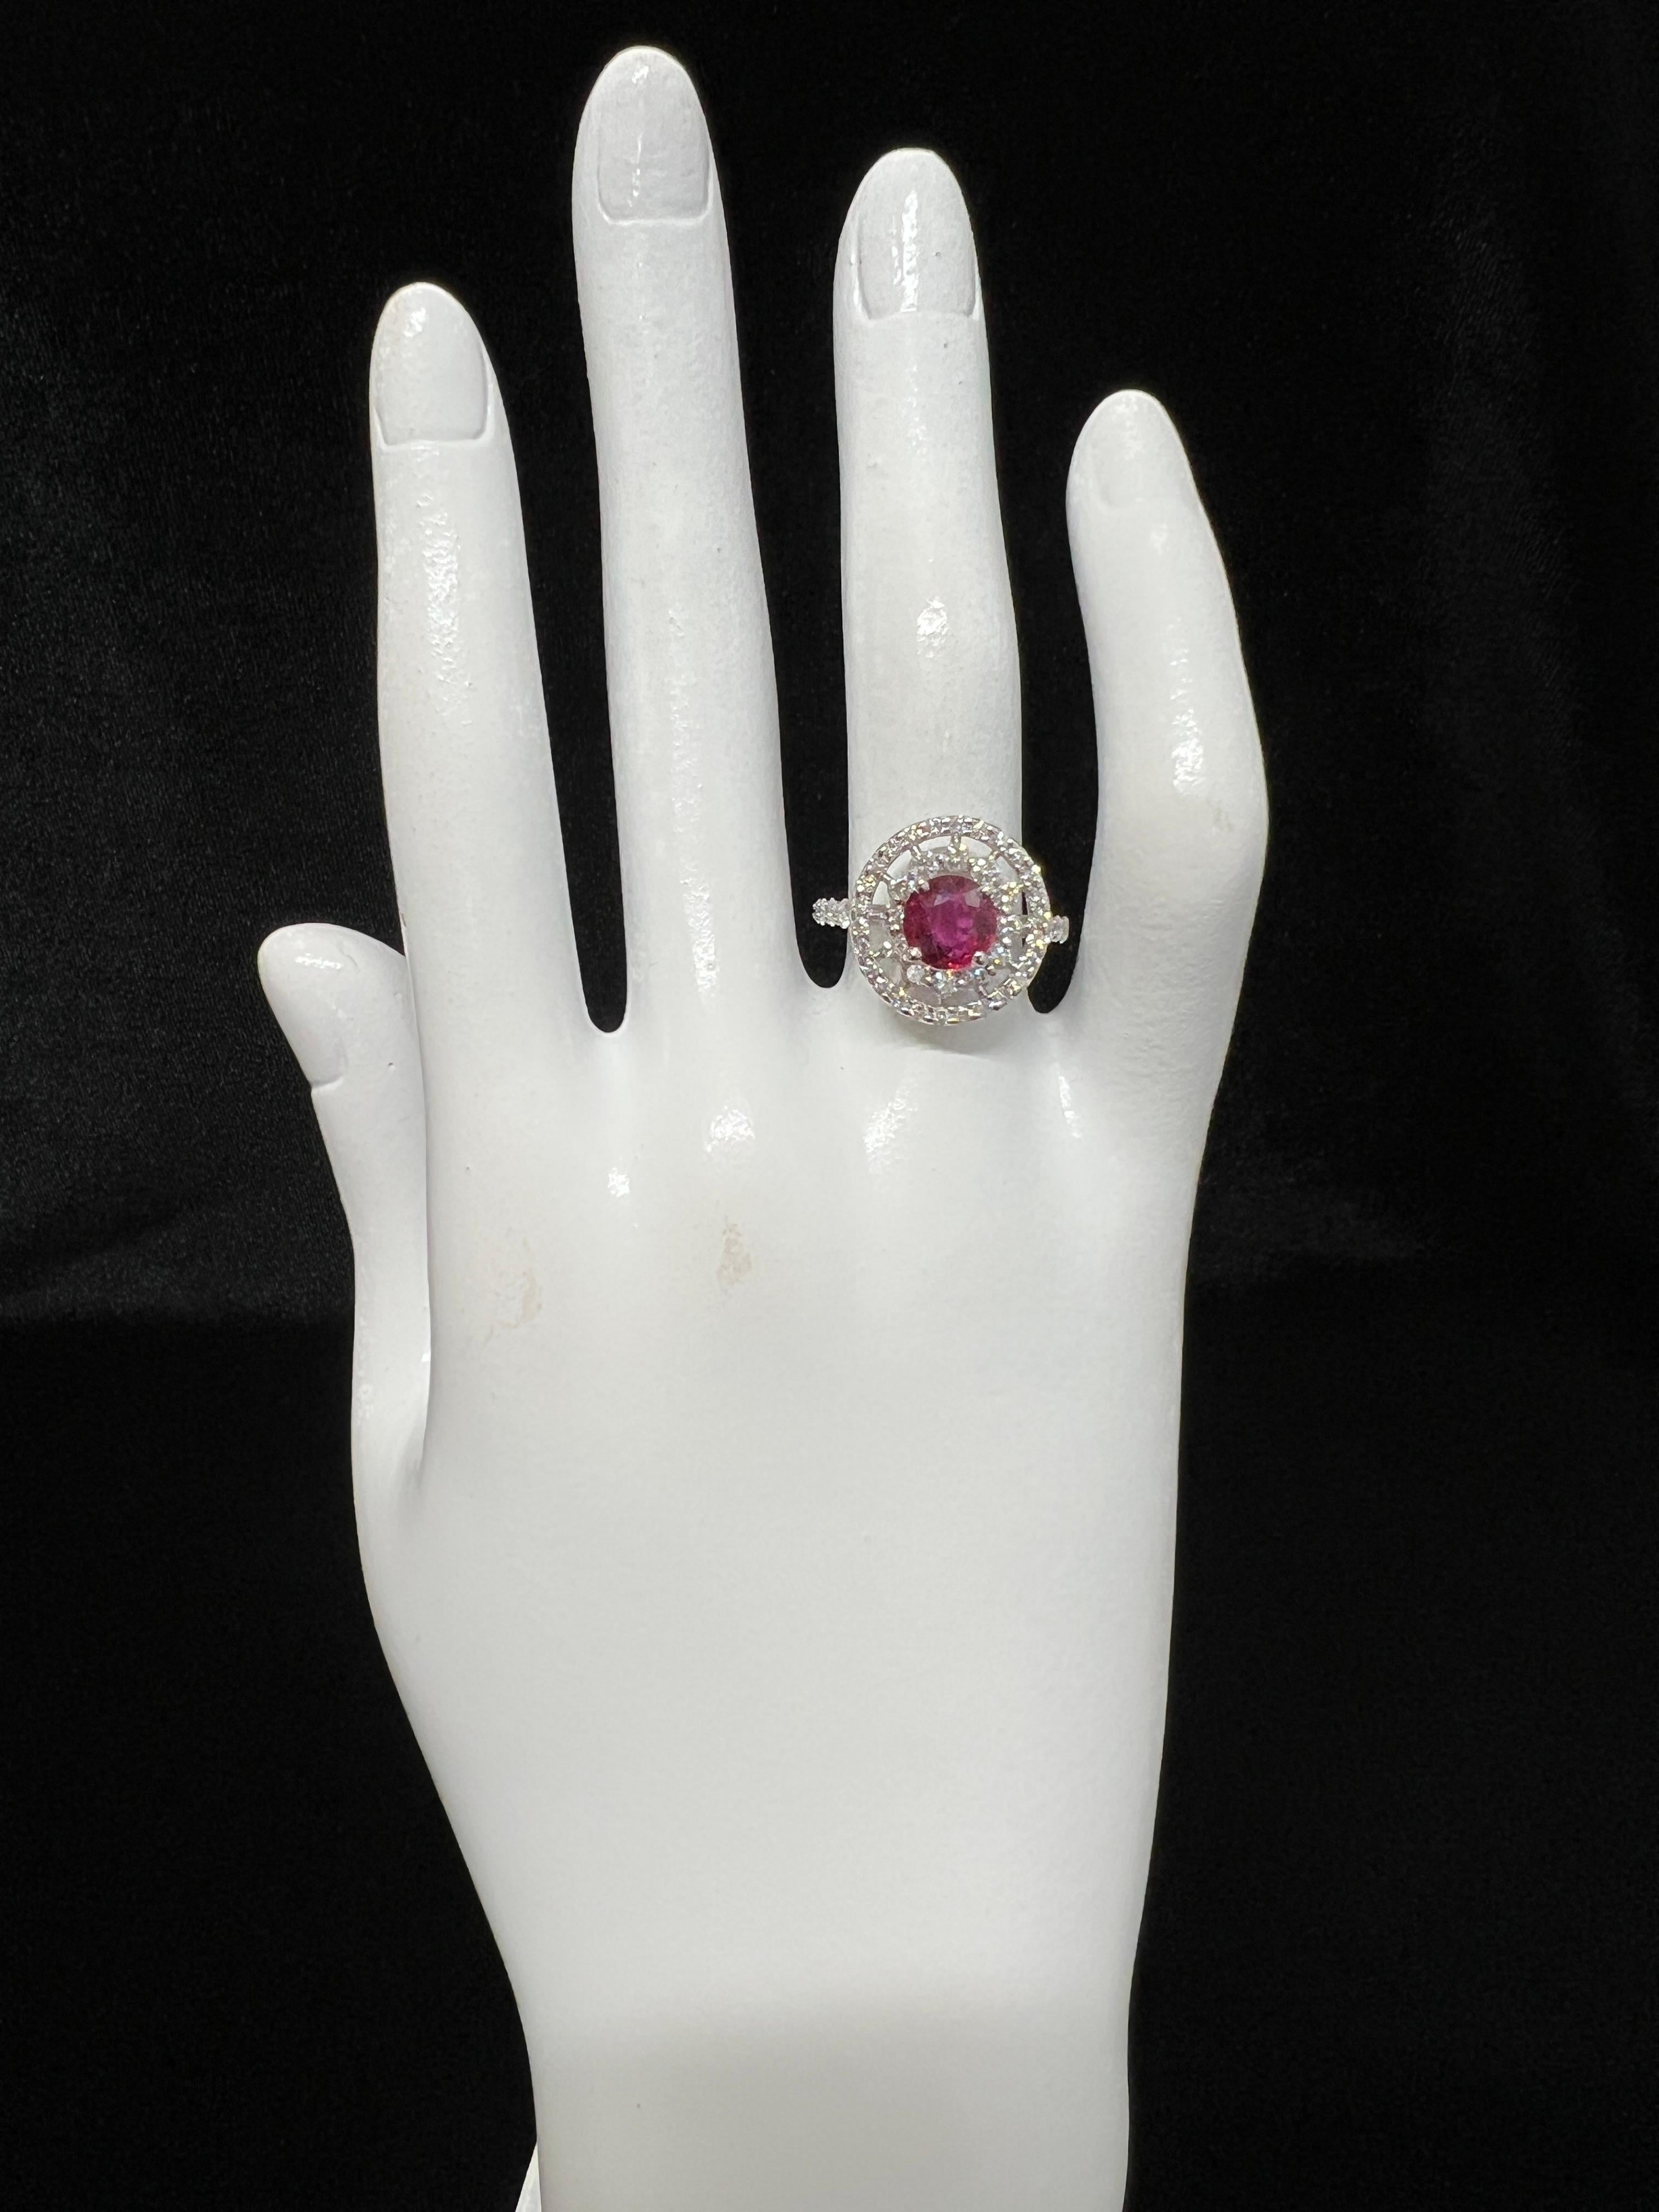 Oval Cut GIA Certified 1.28 Carat Siam Ruby and Diamond Ring Set in Platinum For Sale